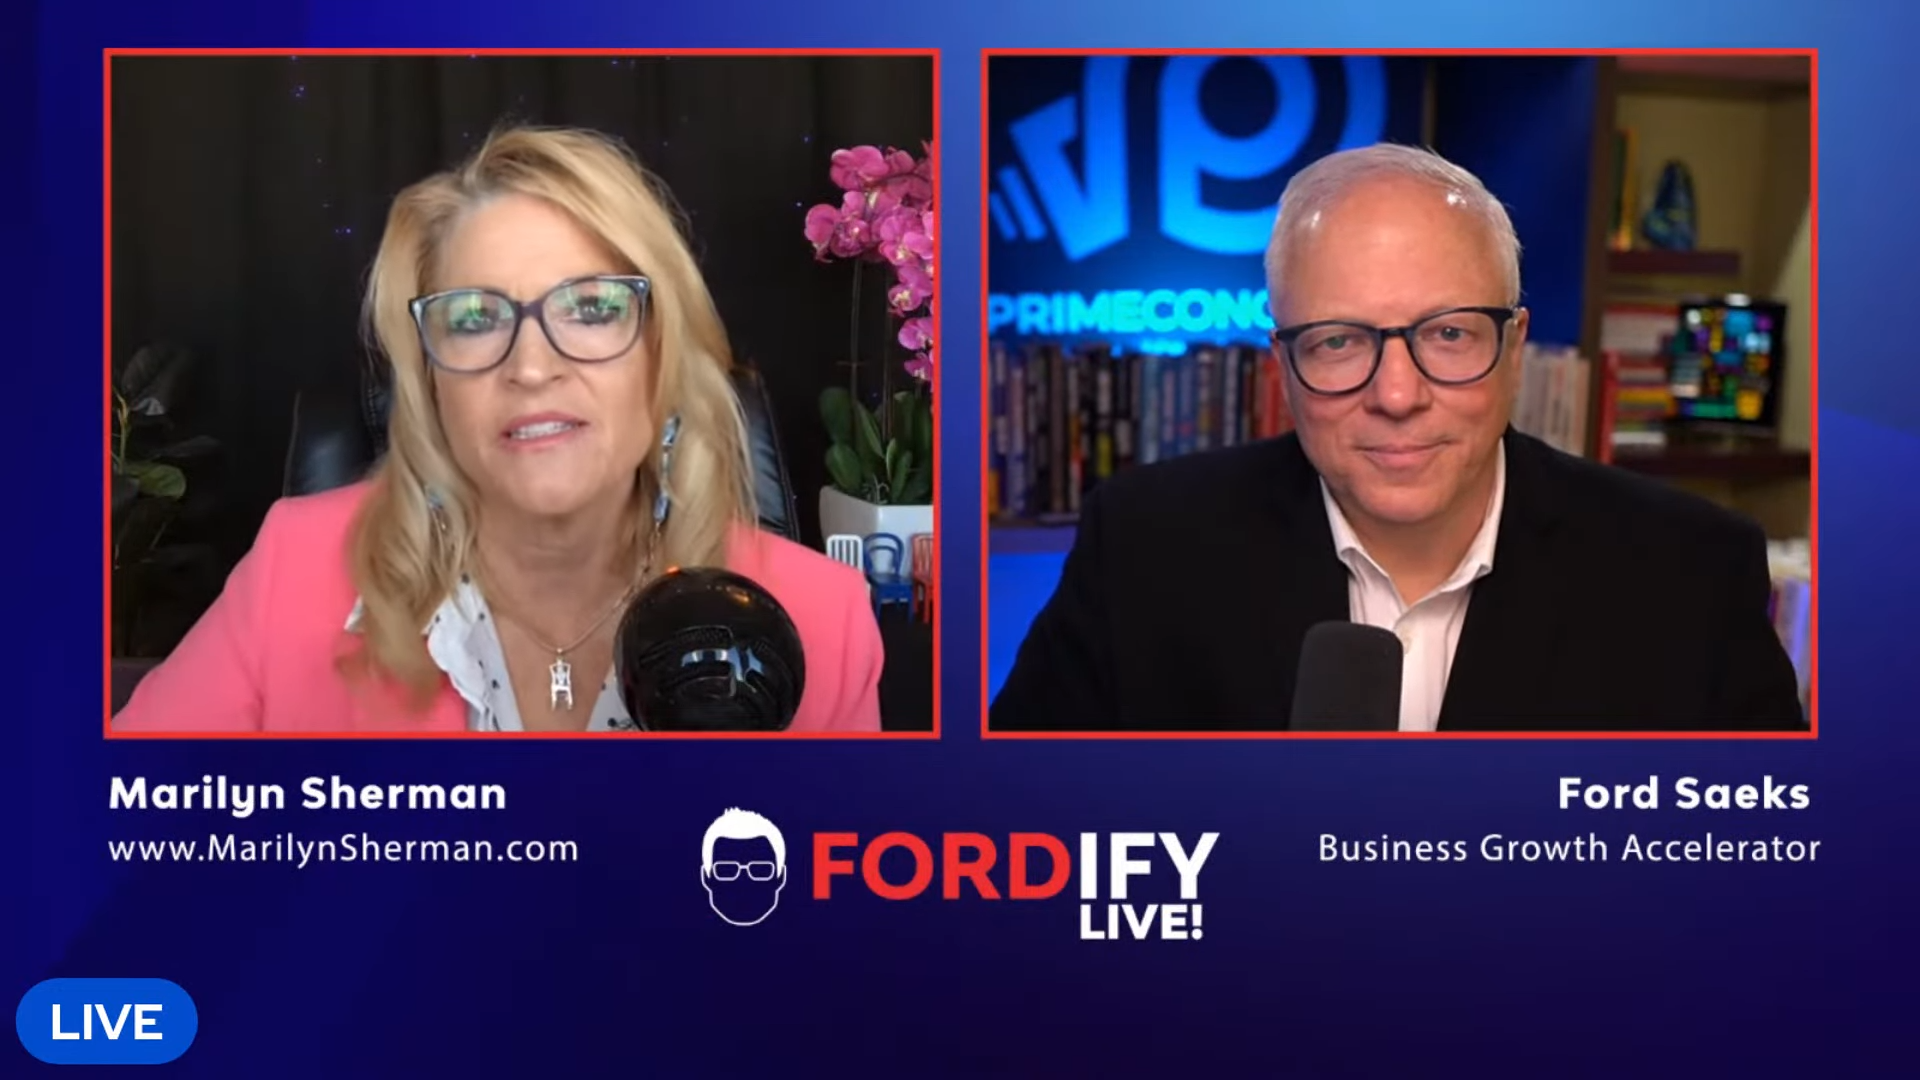 Insights to Inspire Your Staff to Give Their Best Every Day LIVE with Ford Saeks & Marilyn Sherman